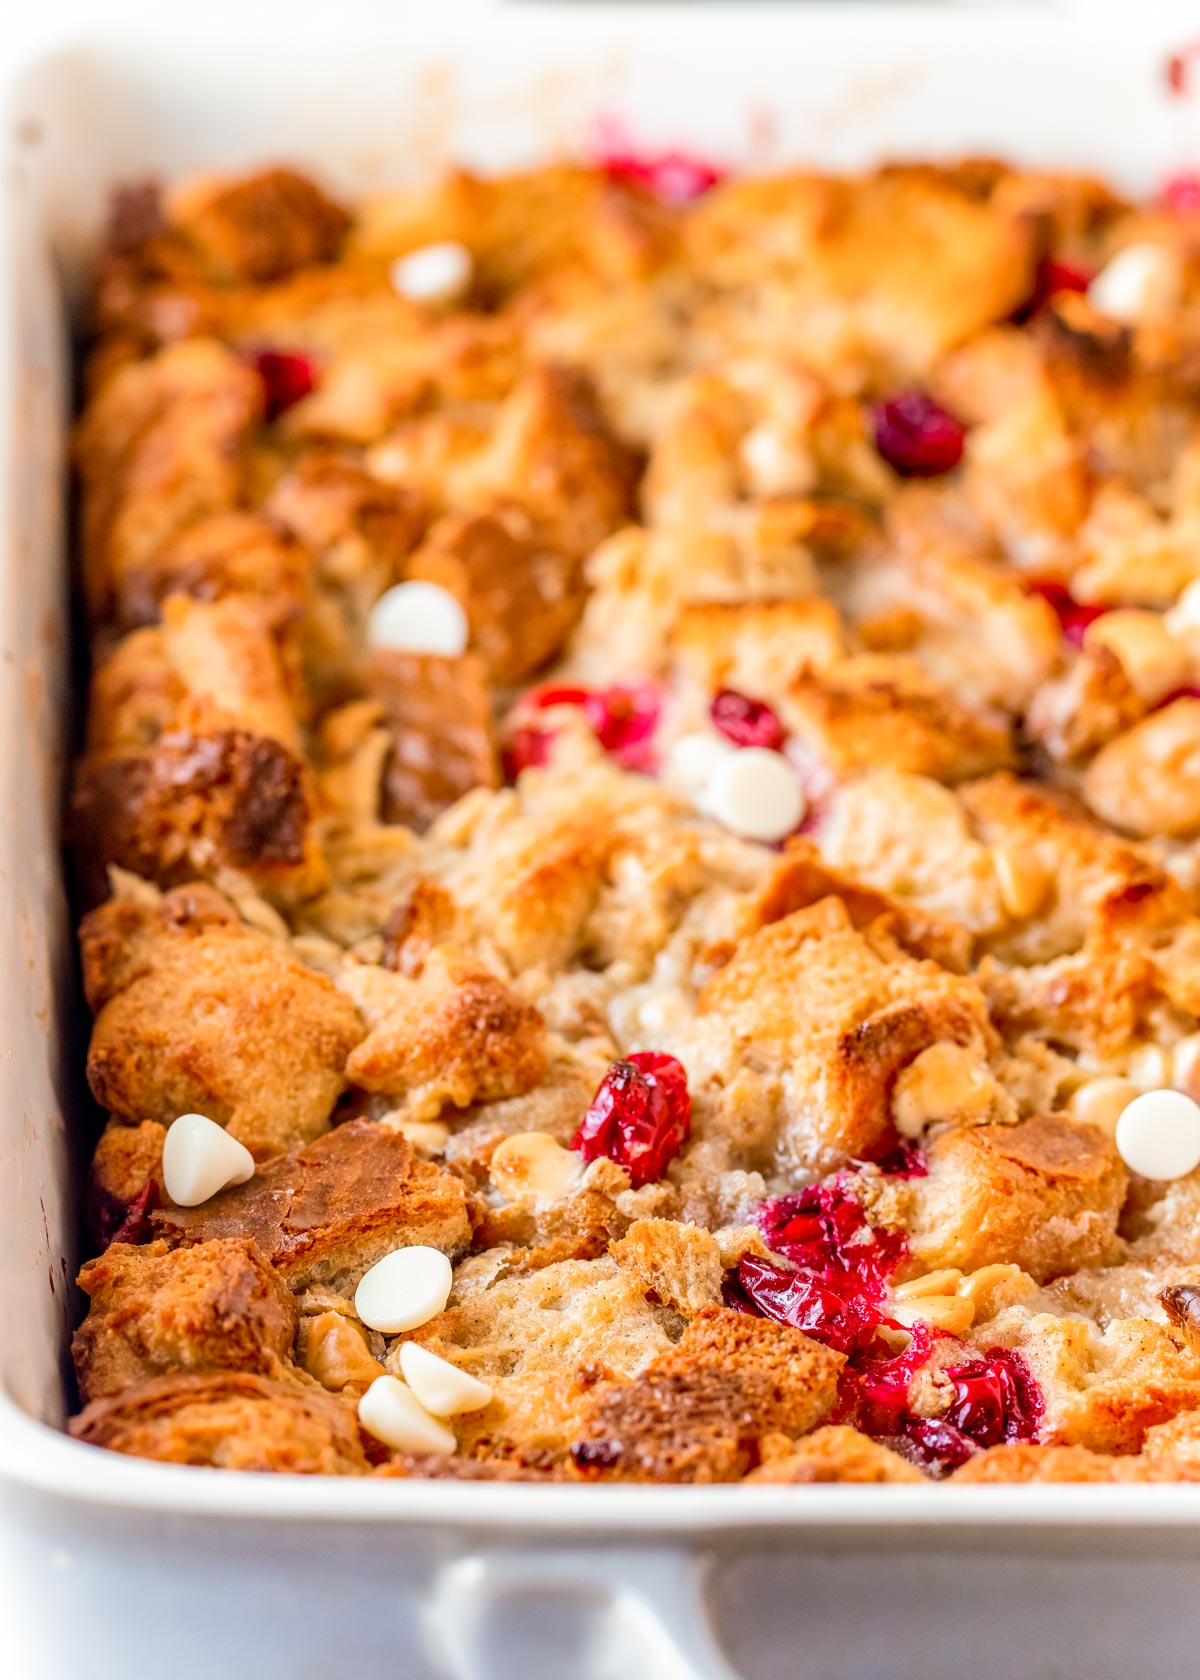 Cranberry and white chocolate bread pudding in a white baking dish.